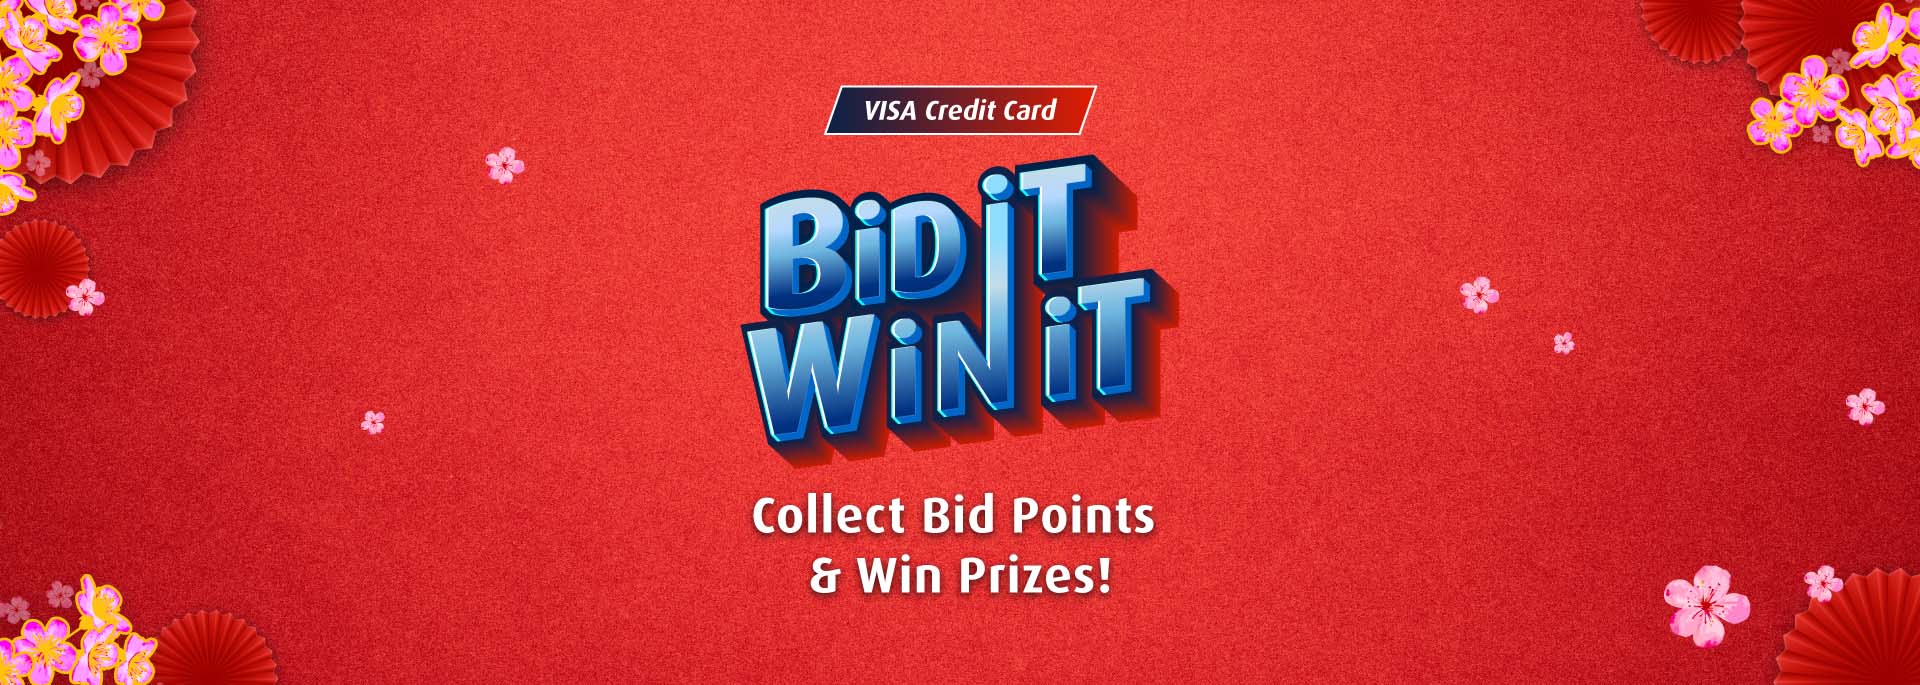 Spend with HLB VISA Credit Card to Bid It or Win It.